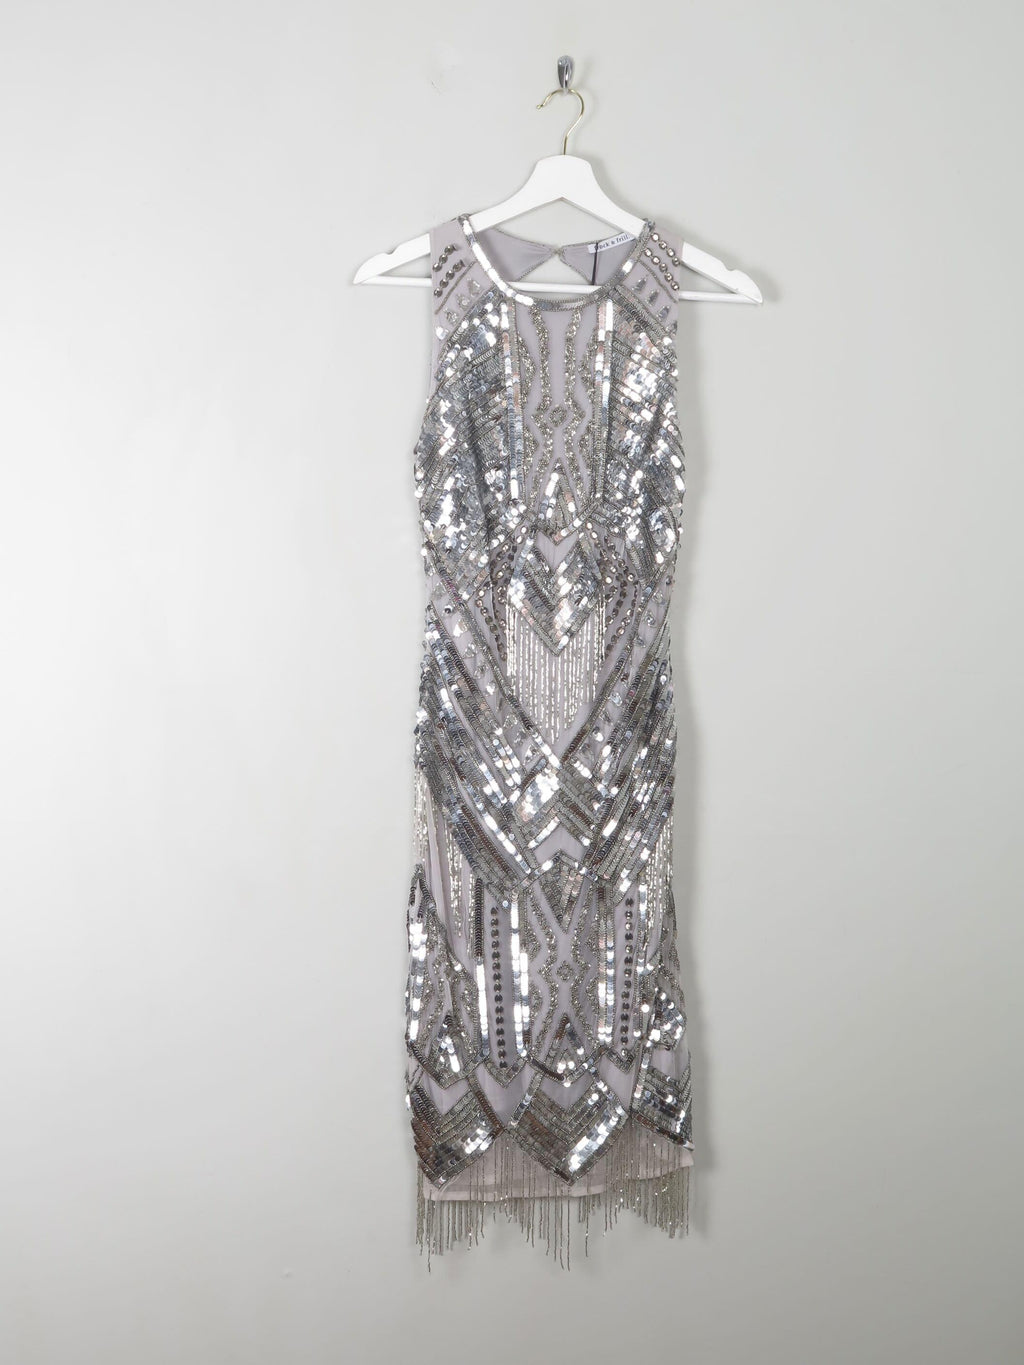 Vintage Style 1920s Flapper Silver Beaded Dress New S - The Harlequin